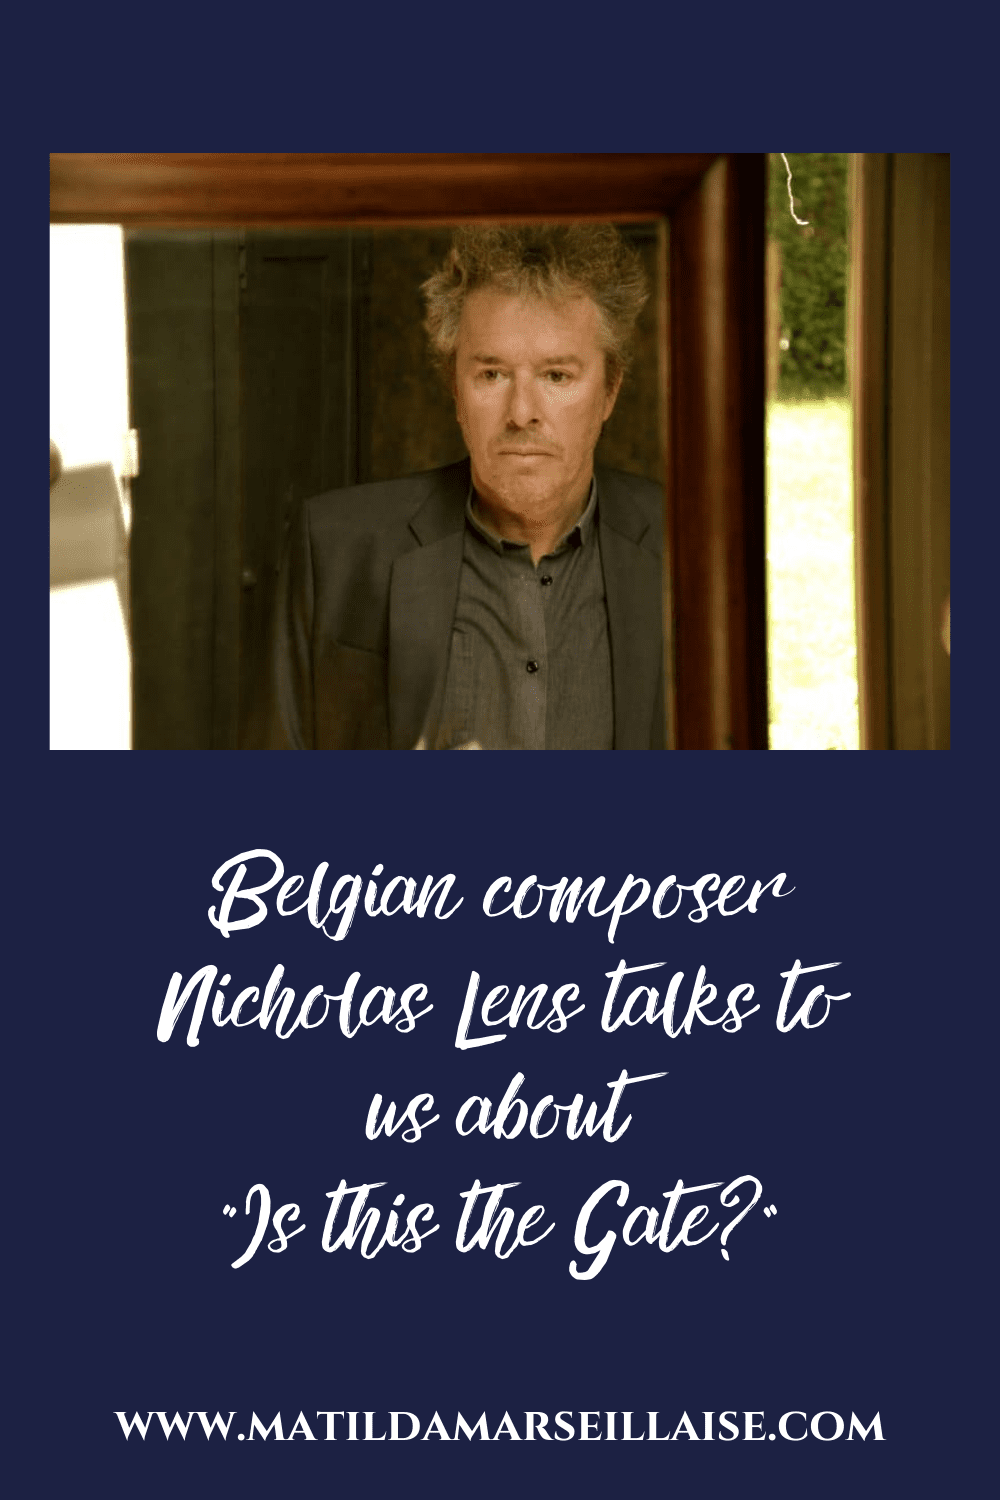 Belgian composer Nicholas Lens talks about the opera he wrote with JM Coetzee, a major excerpt of which will be presented at the Adelaide Festival 2024